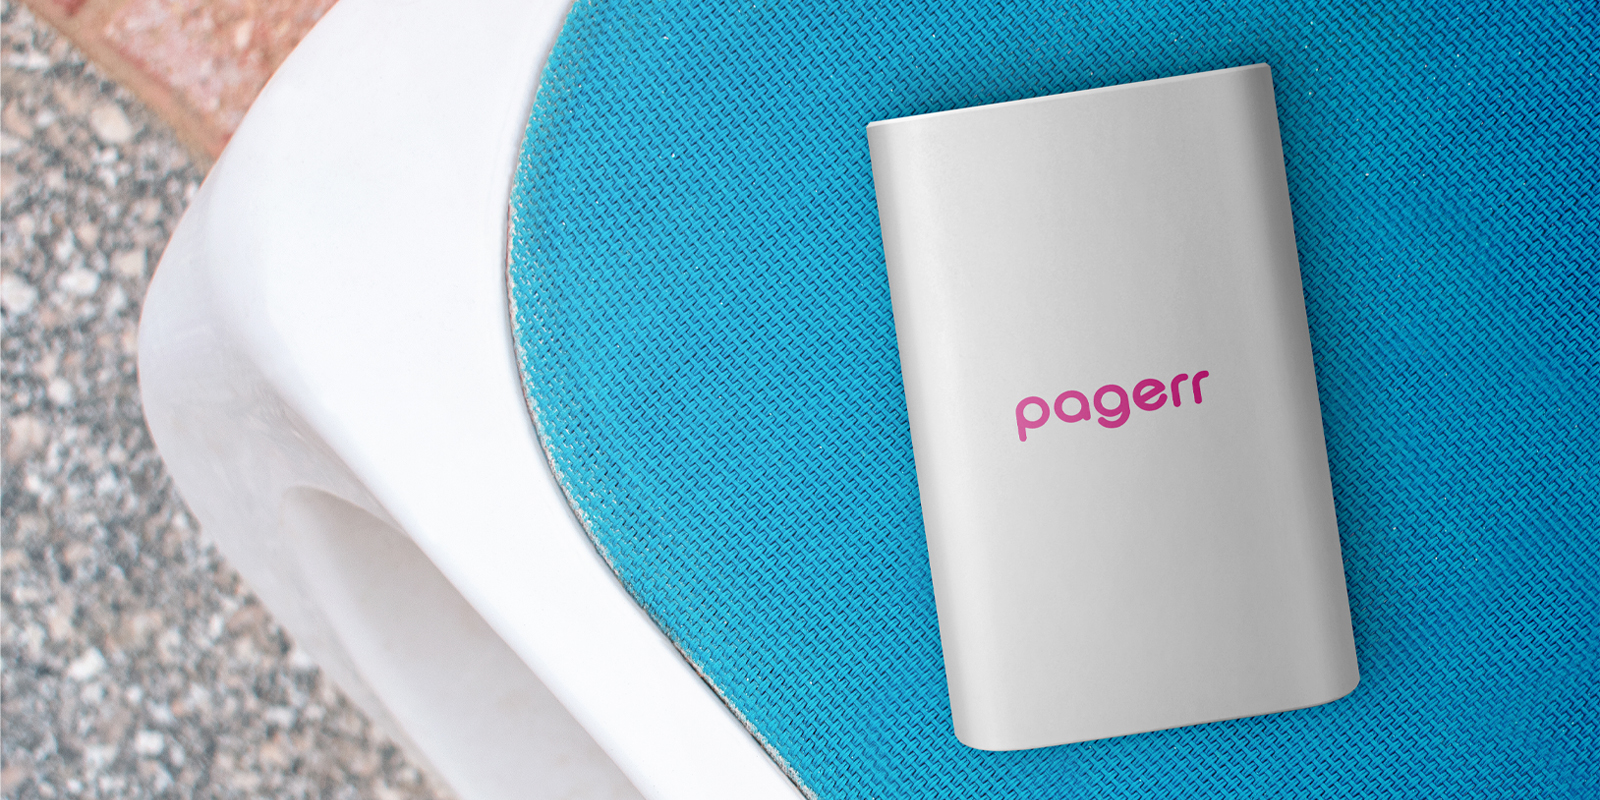 Chargers & power banks in Cairns - Print with Pagerr